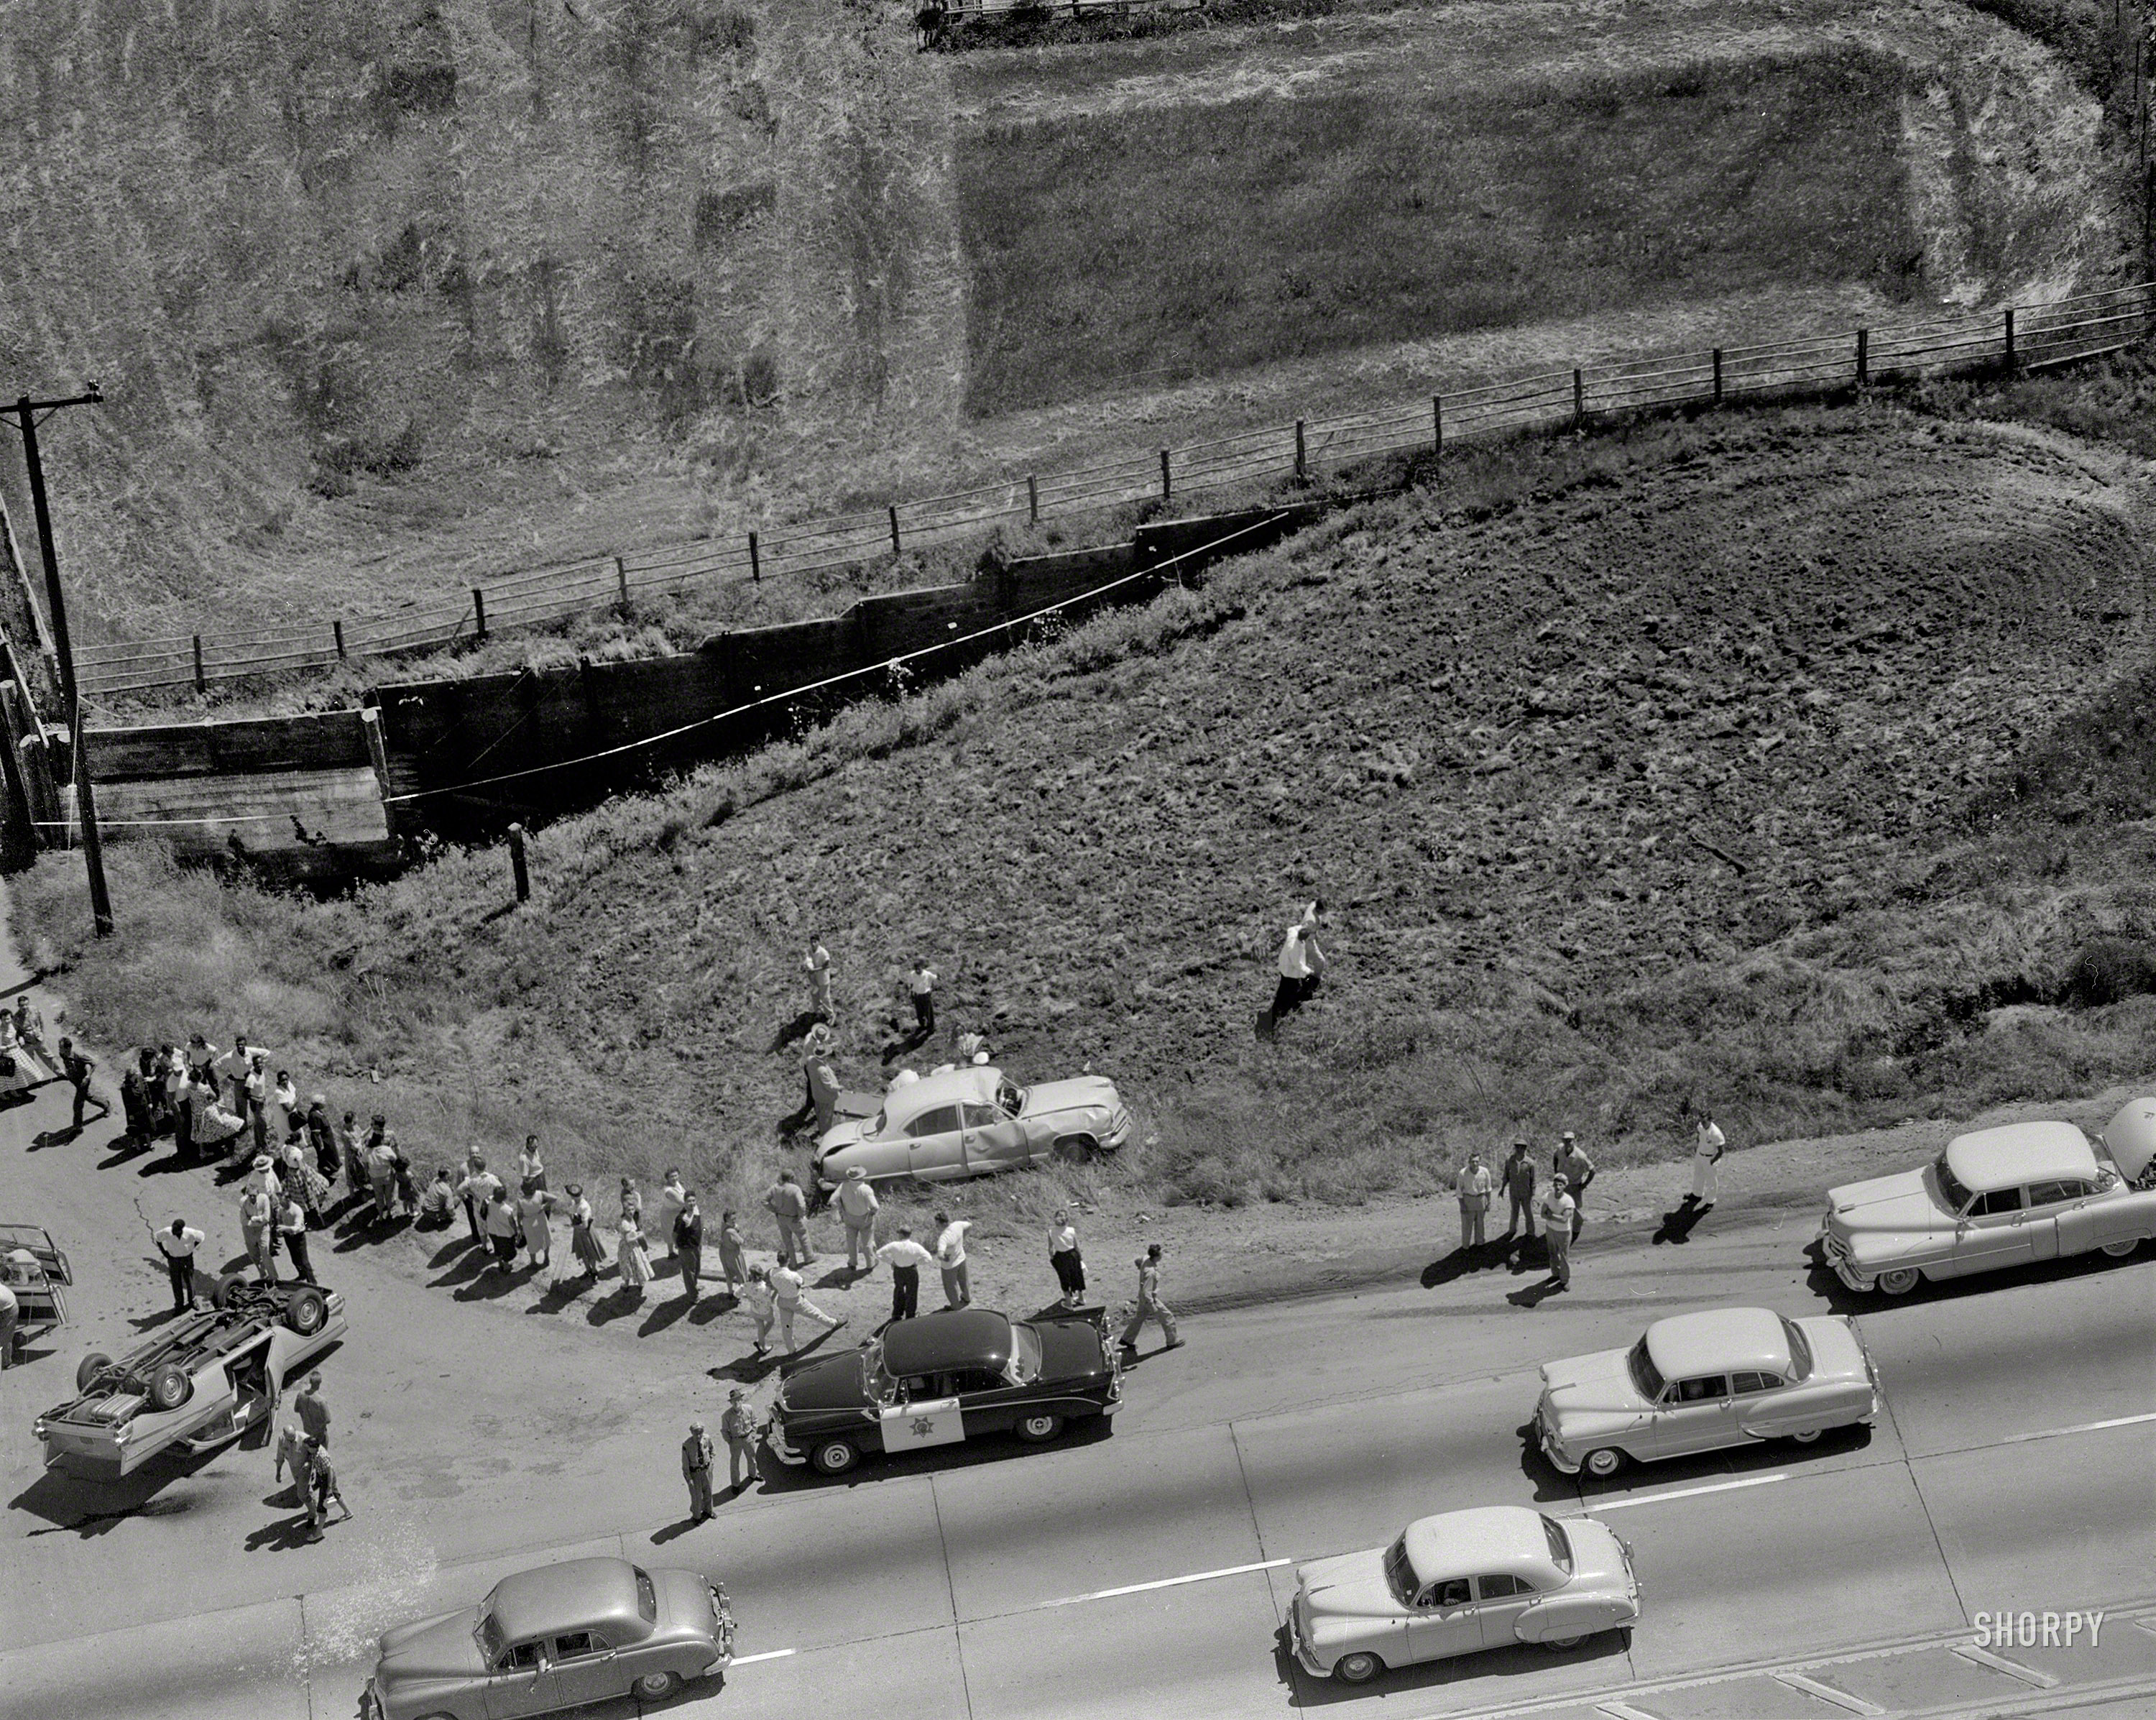 Oakland, California, circa 1957. "Collision aerial." Aftermath of a crash between a Kaiser sedan (one of two in this photo) and a 1957 Chevy coupe. View full size.